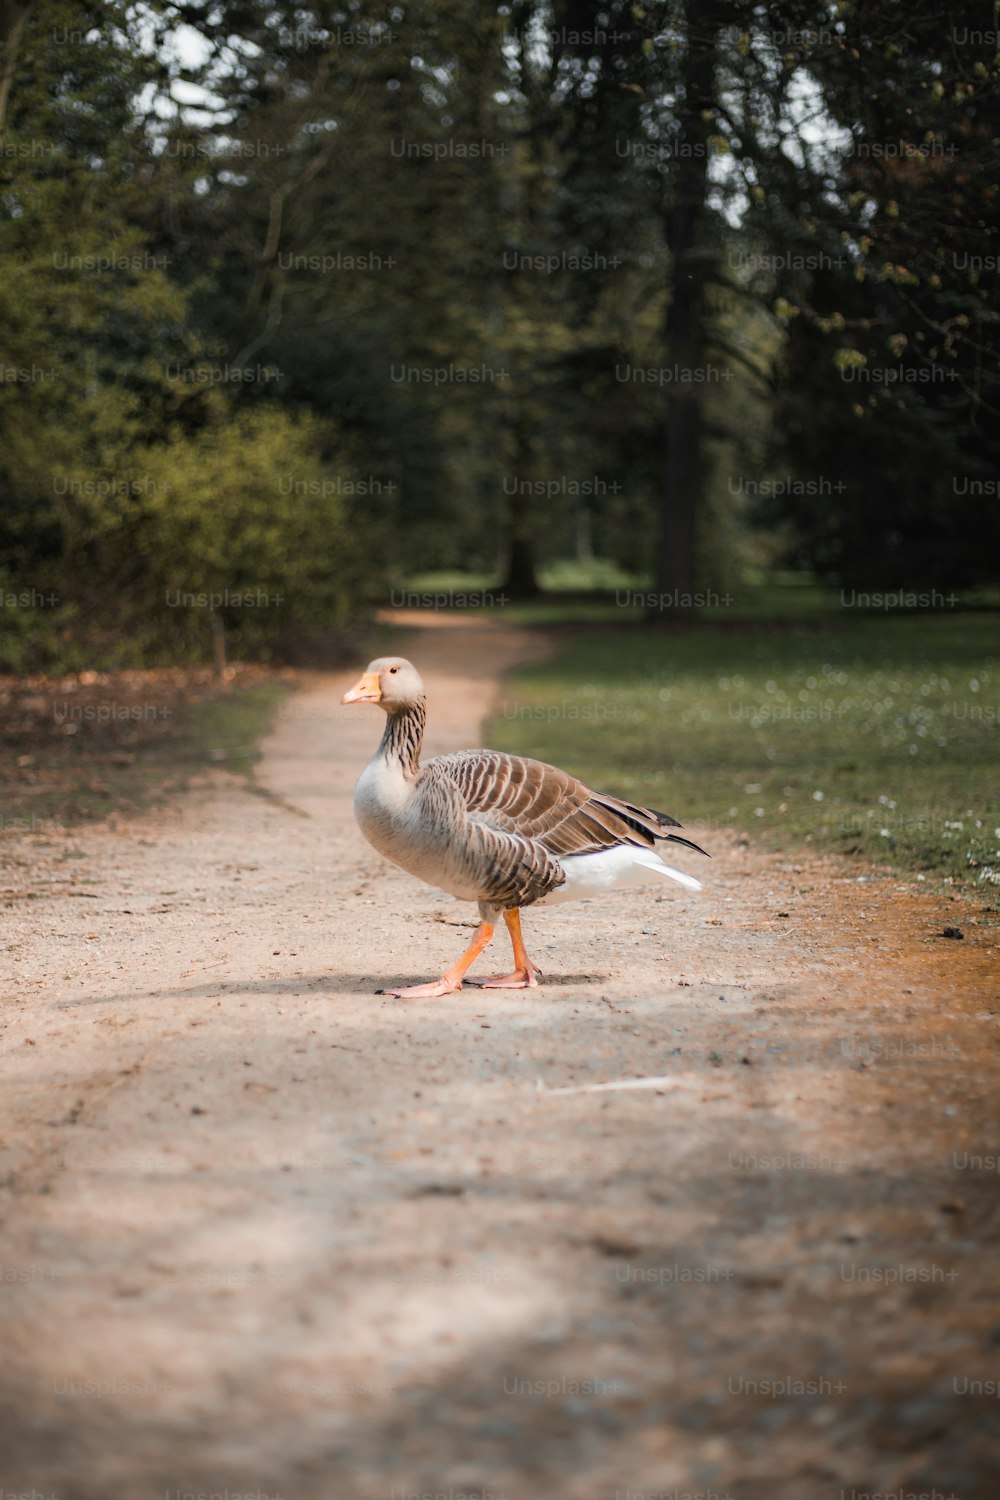 a duck standing on the side of a dirt road